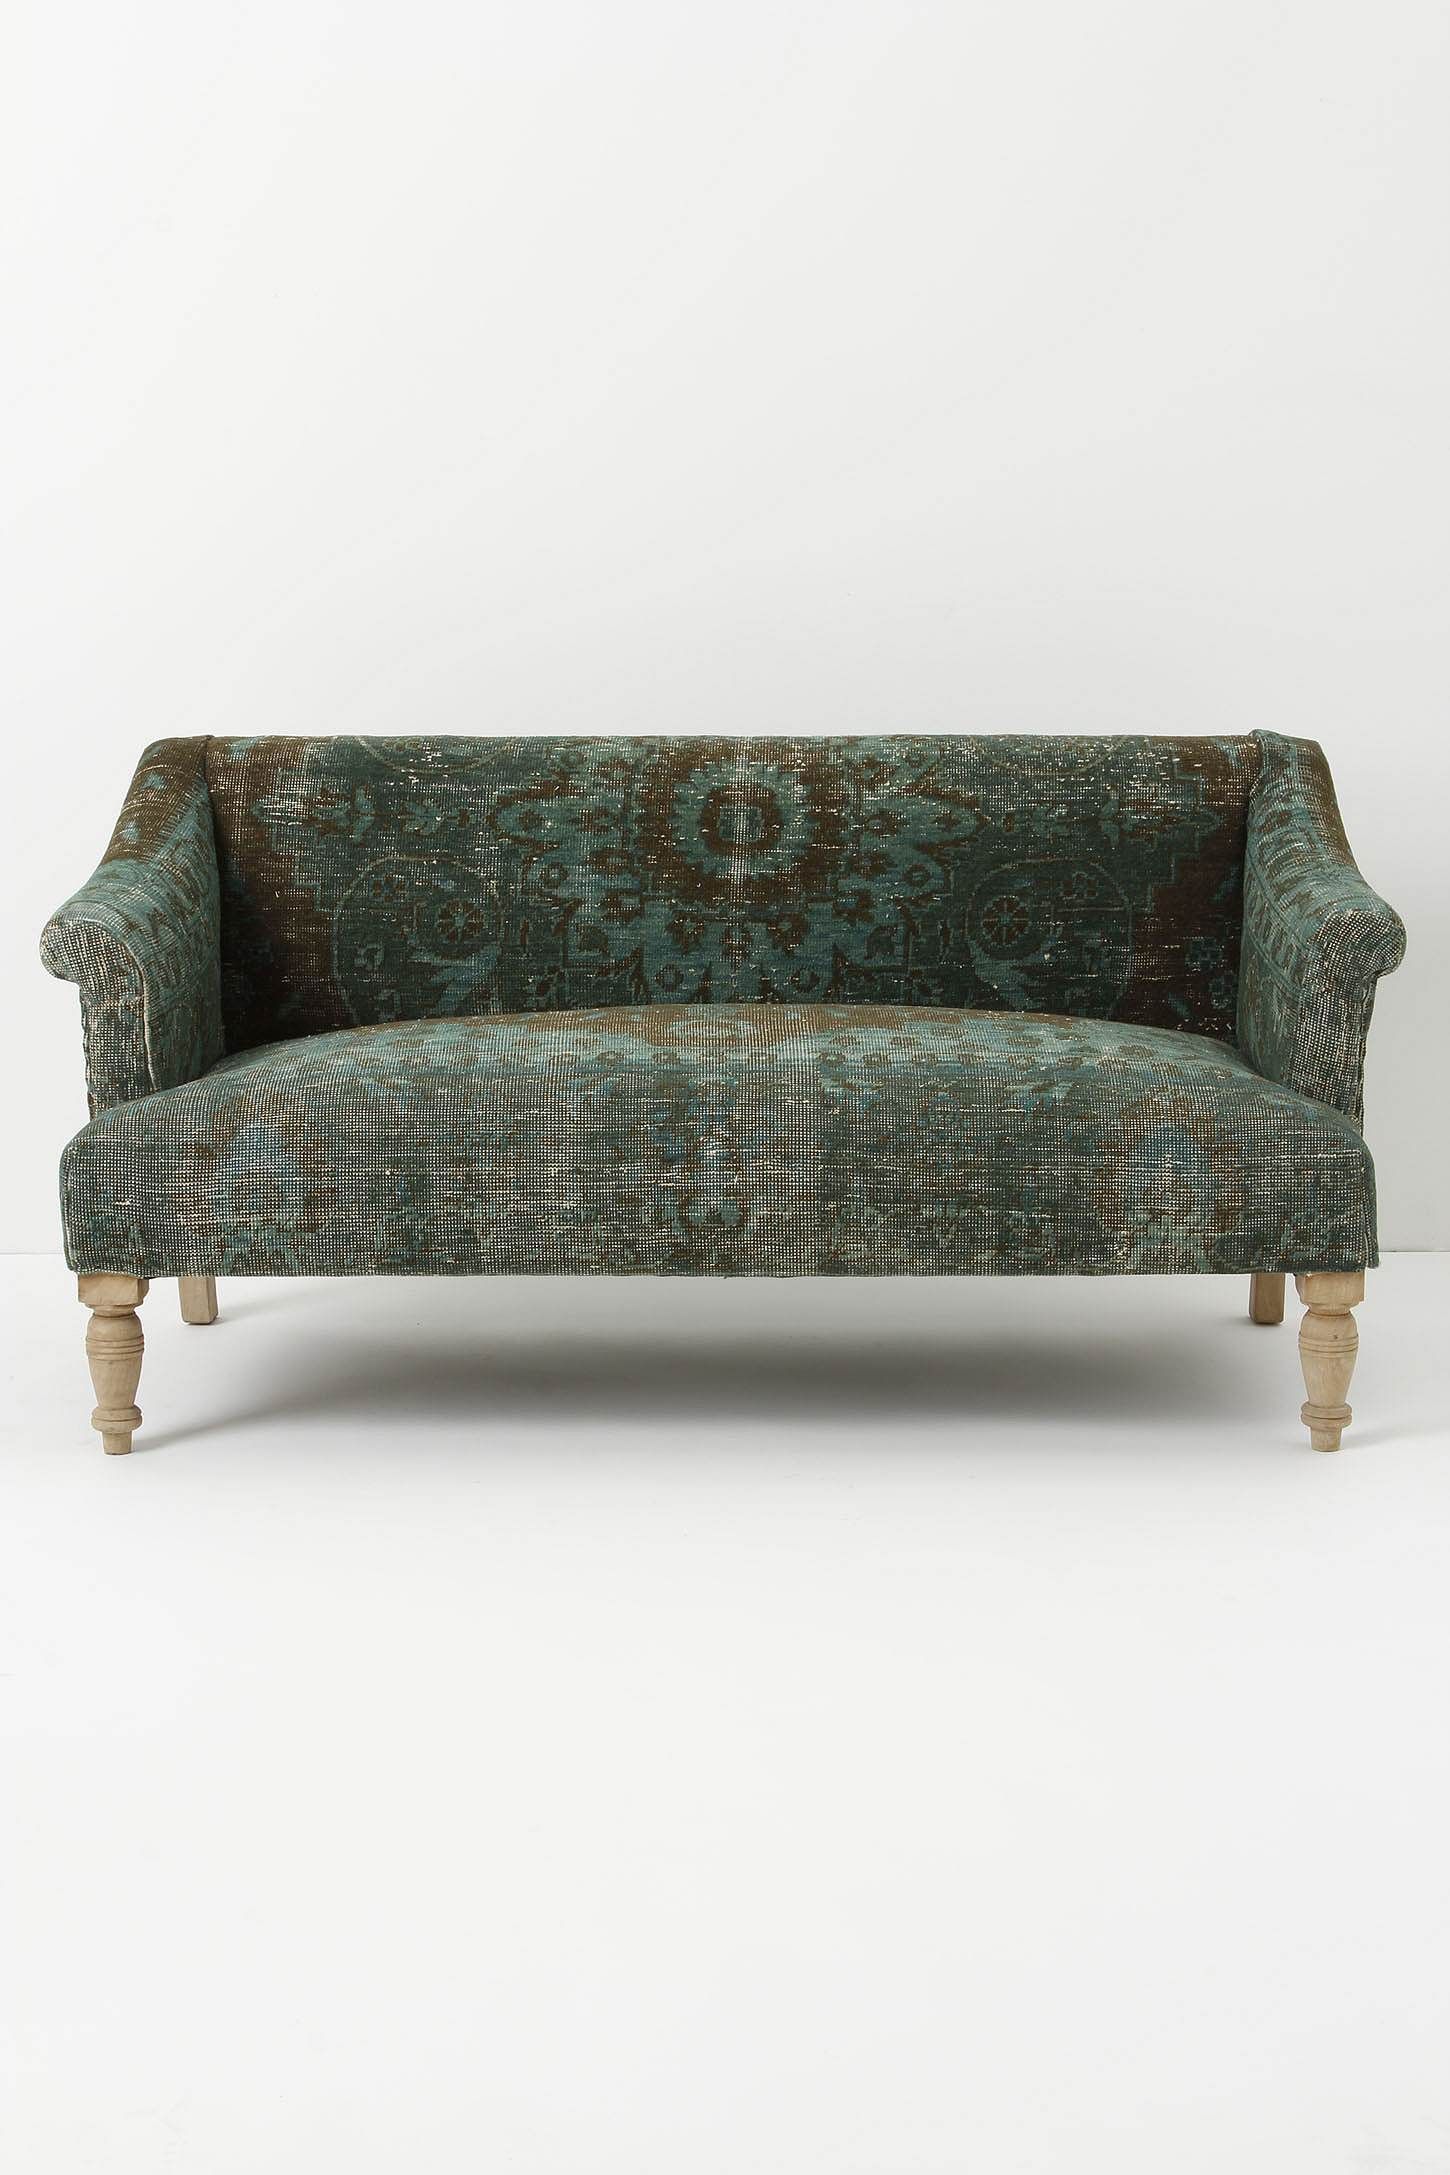 Abigail Settee From Anthropologie | Furniture – Sofas & Chaises Regarding Abigail Ii Sofa Chairs (View 5 of 20)